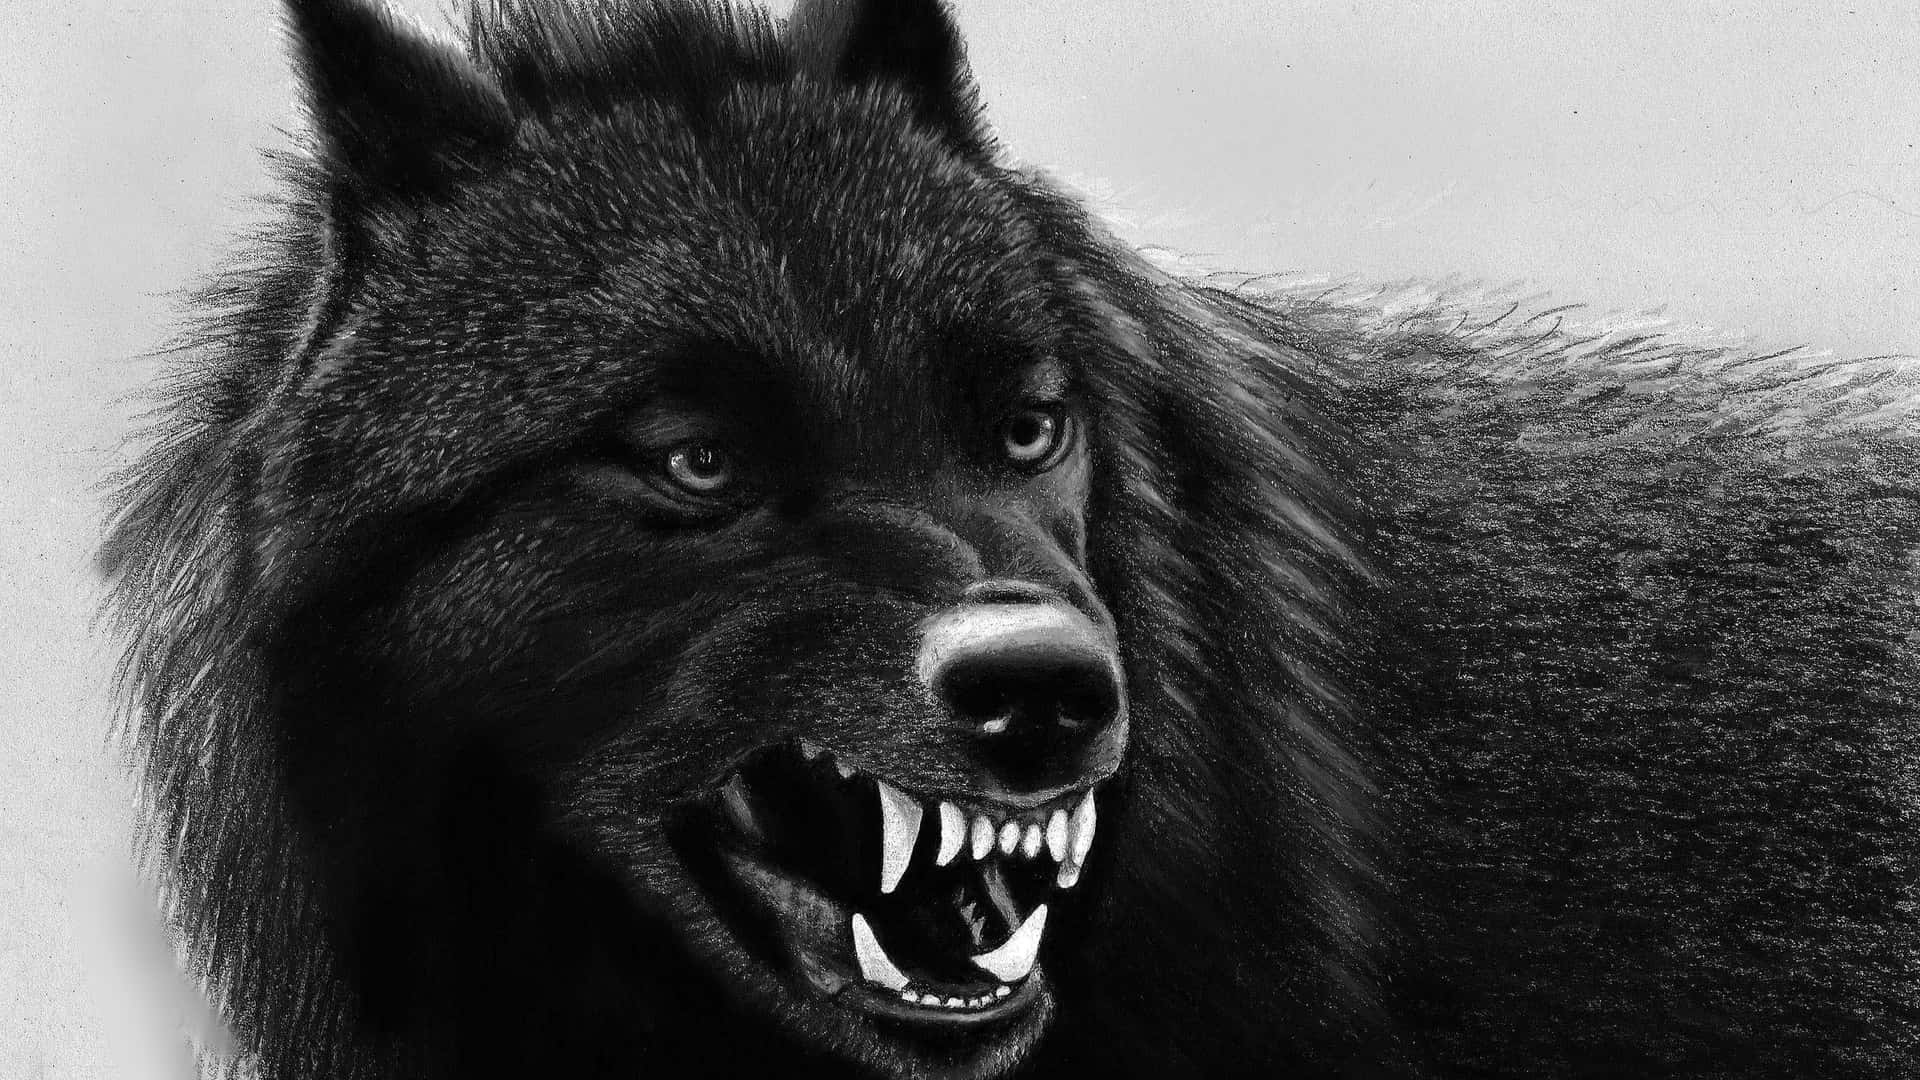 “A mysterious black wolf stares into the night”